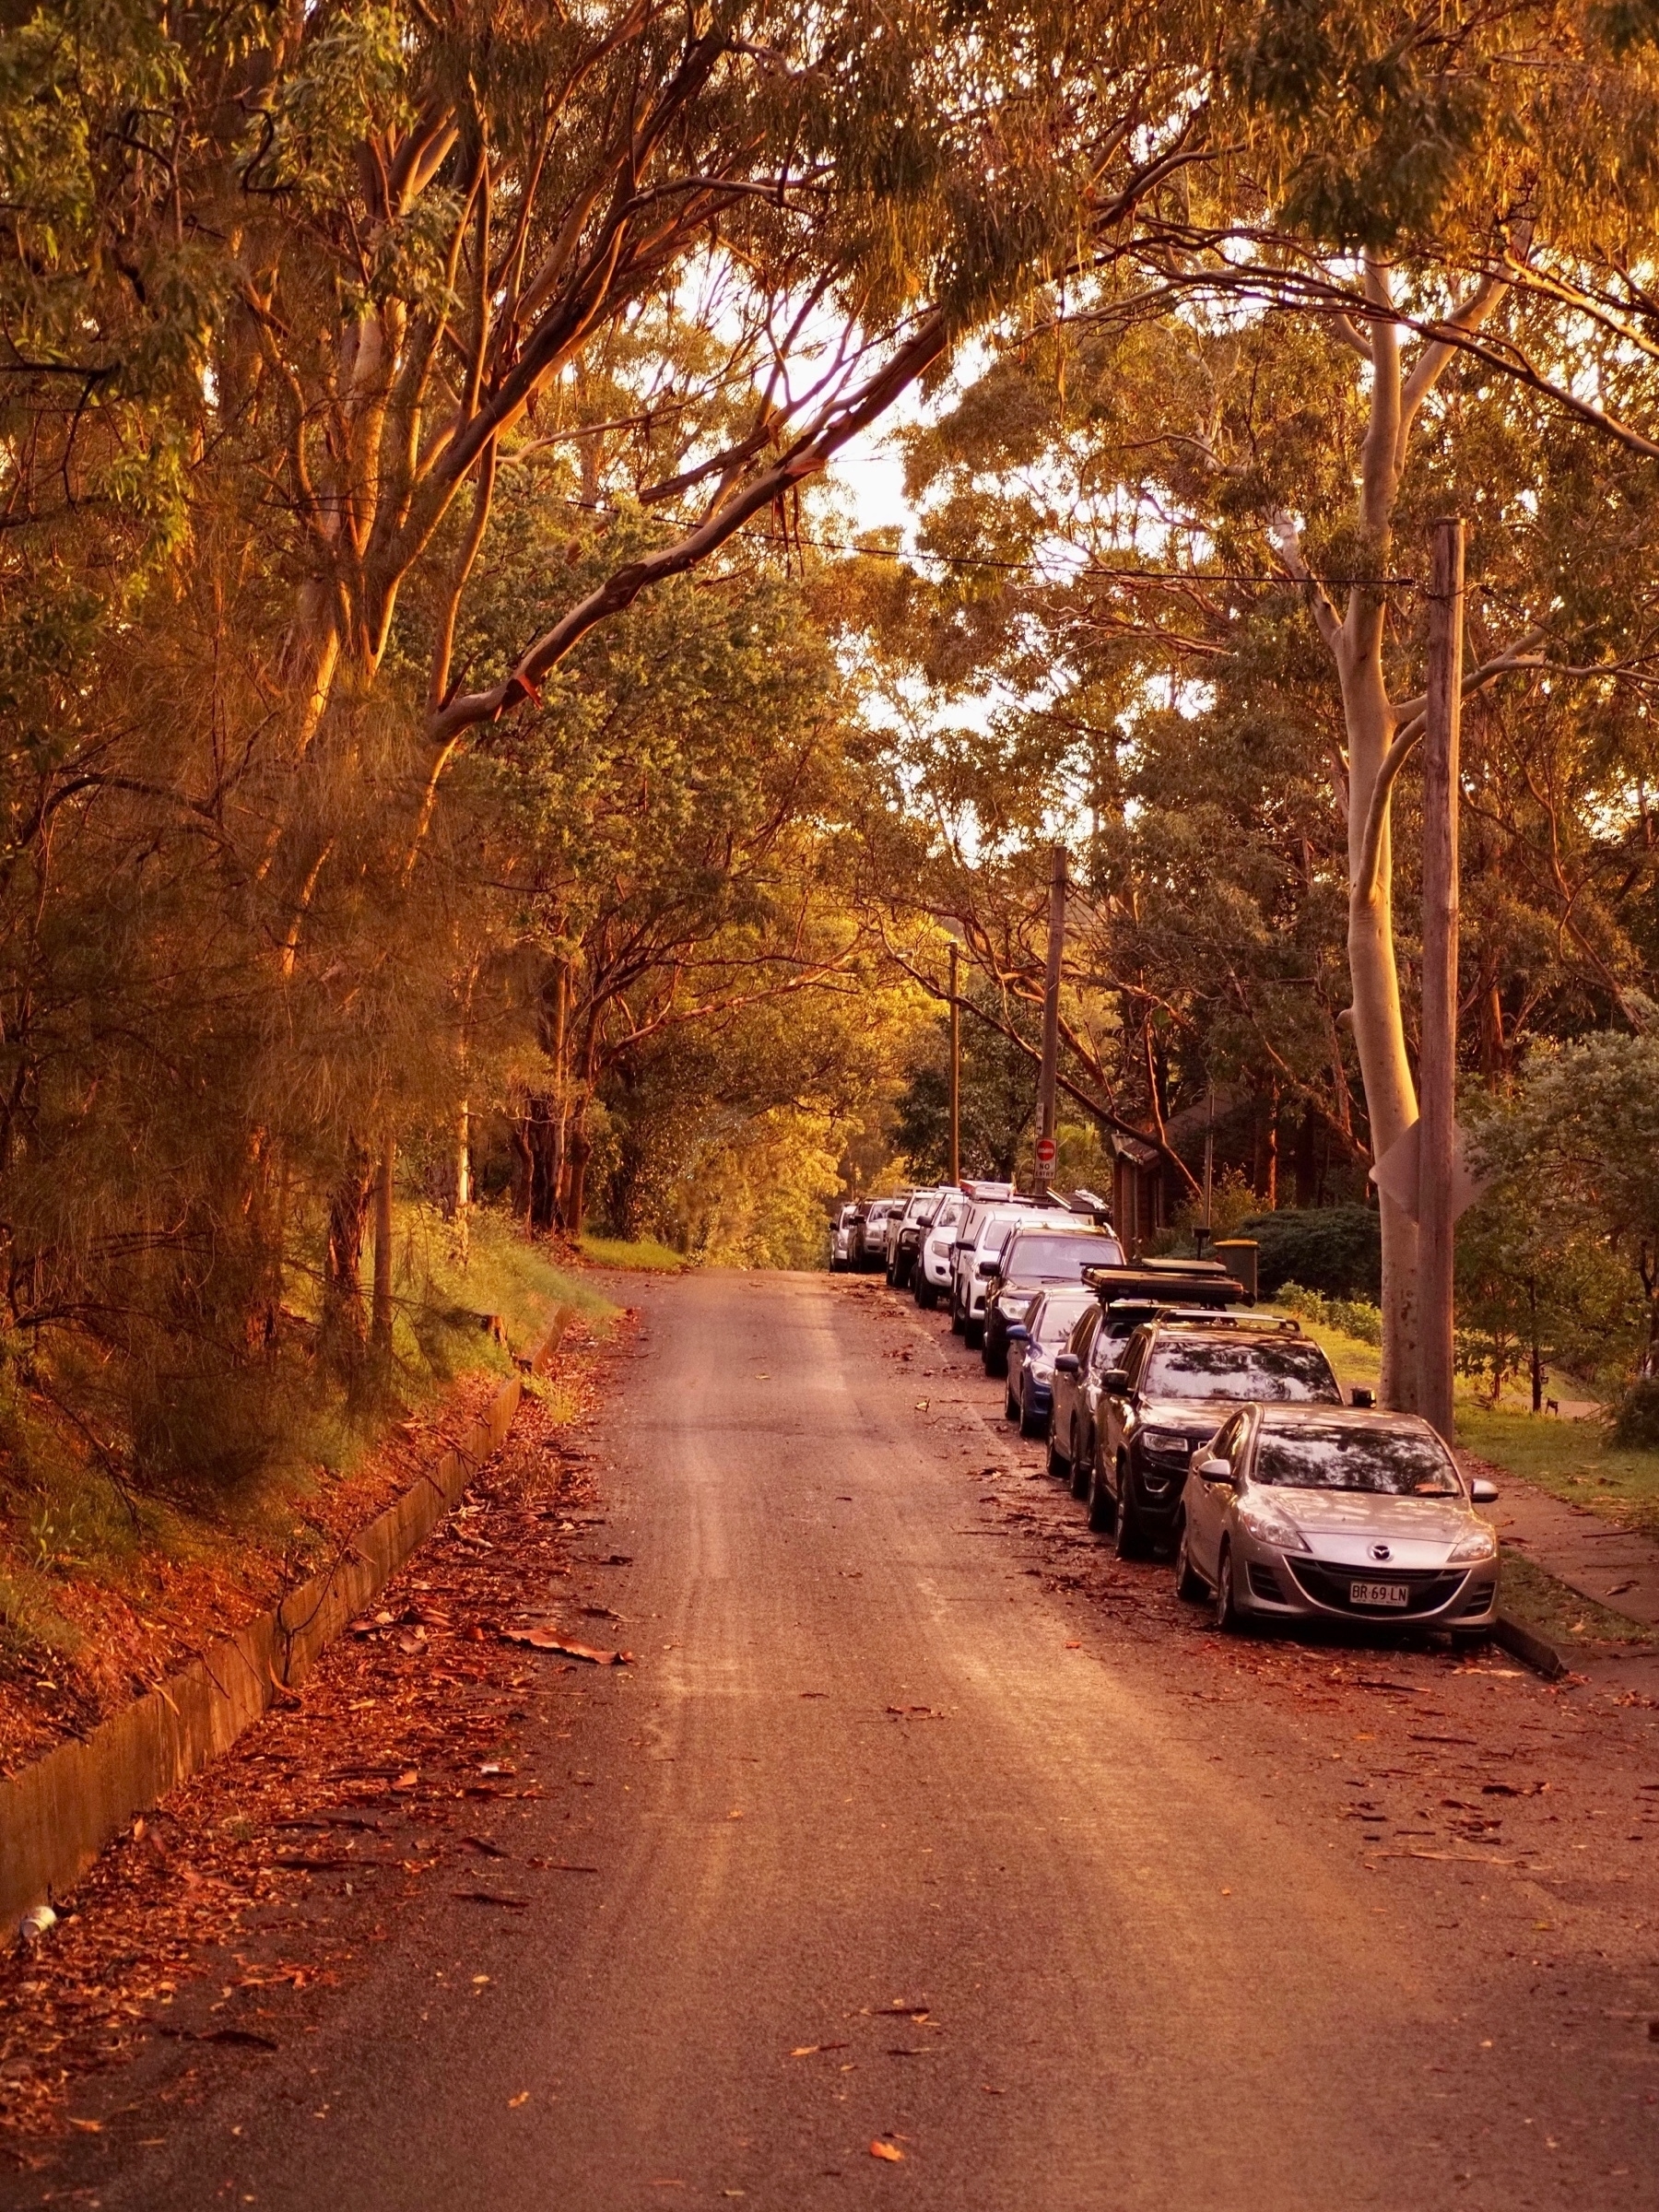 A road stretches over a crest into the distance, withparked cars to the right and overhanging eucalypts.